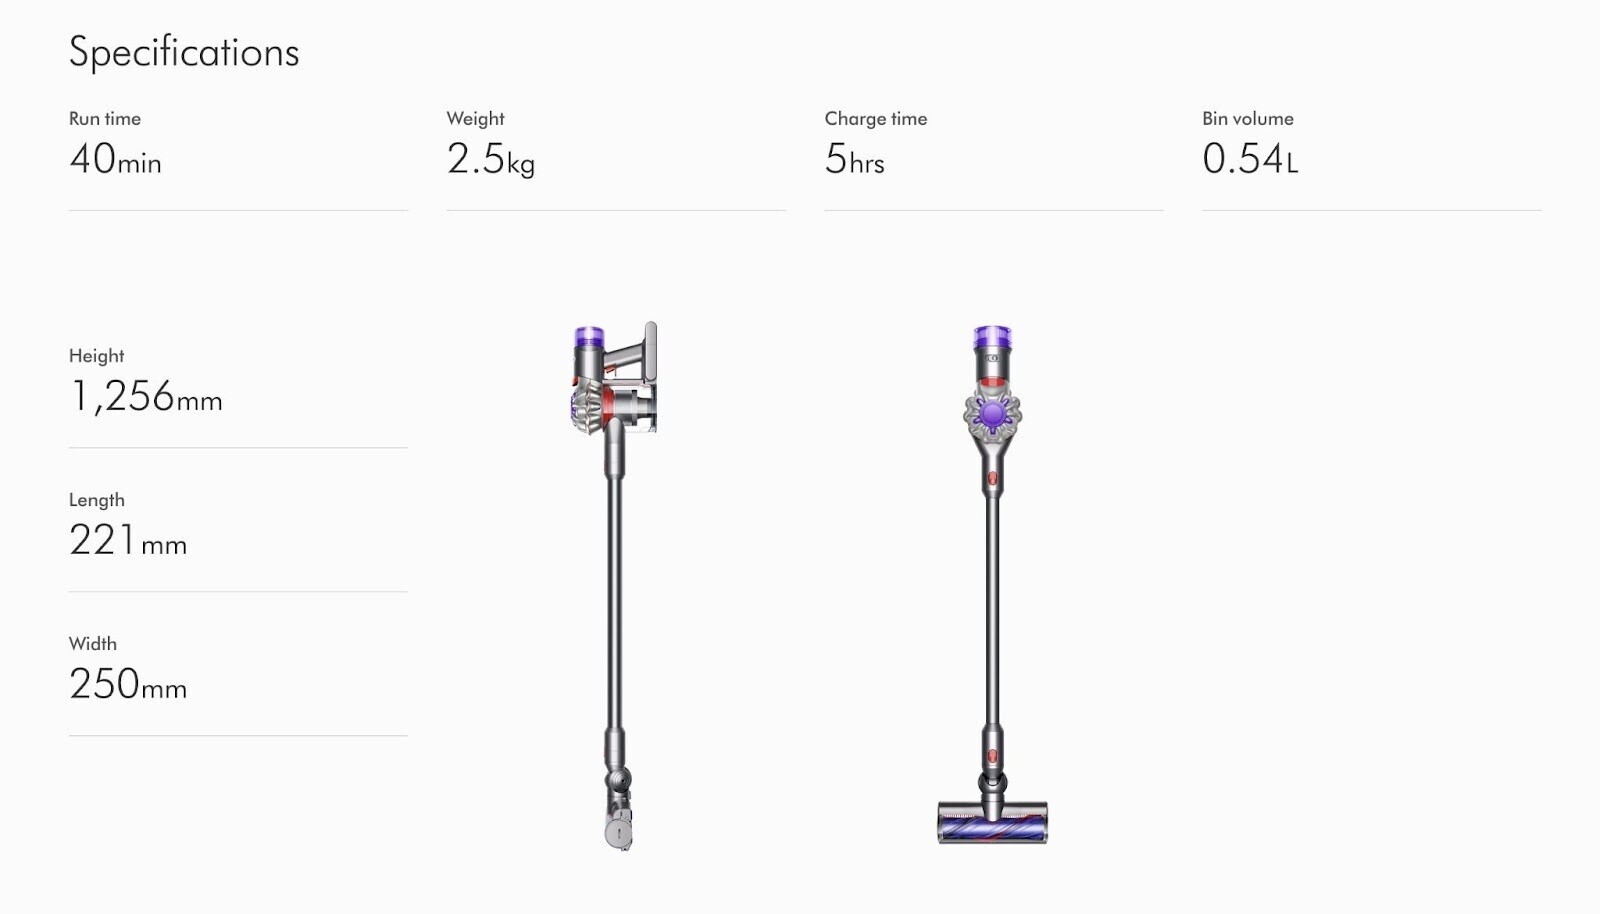 Dyson’s specifications